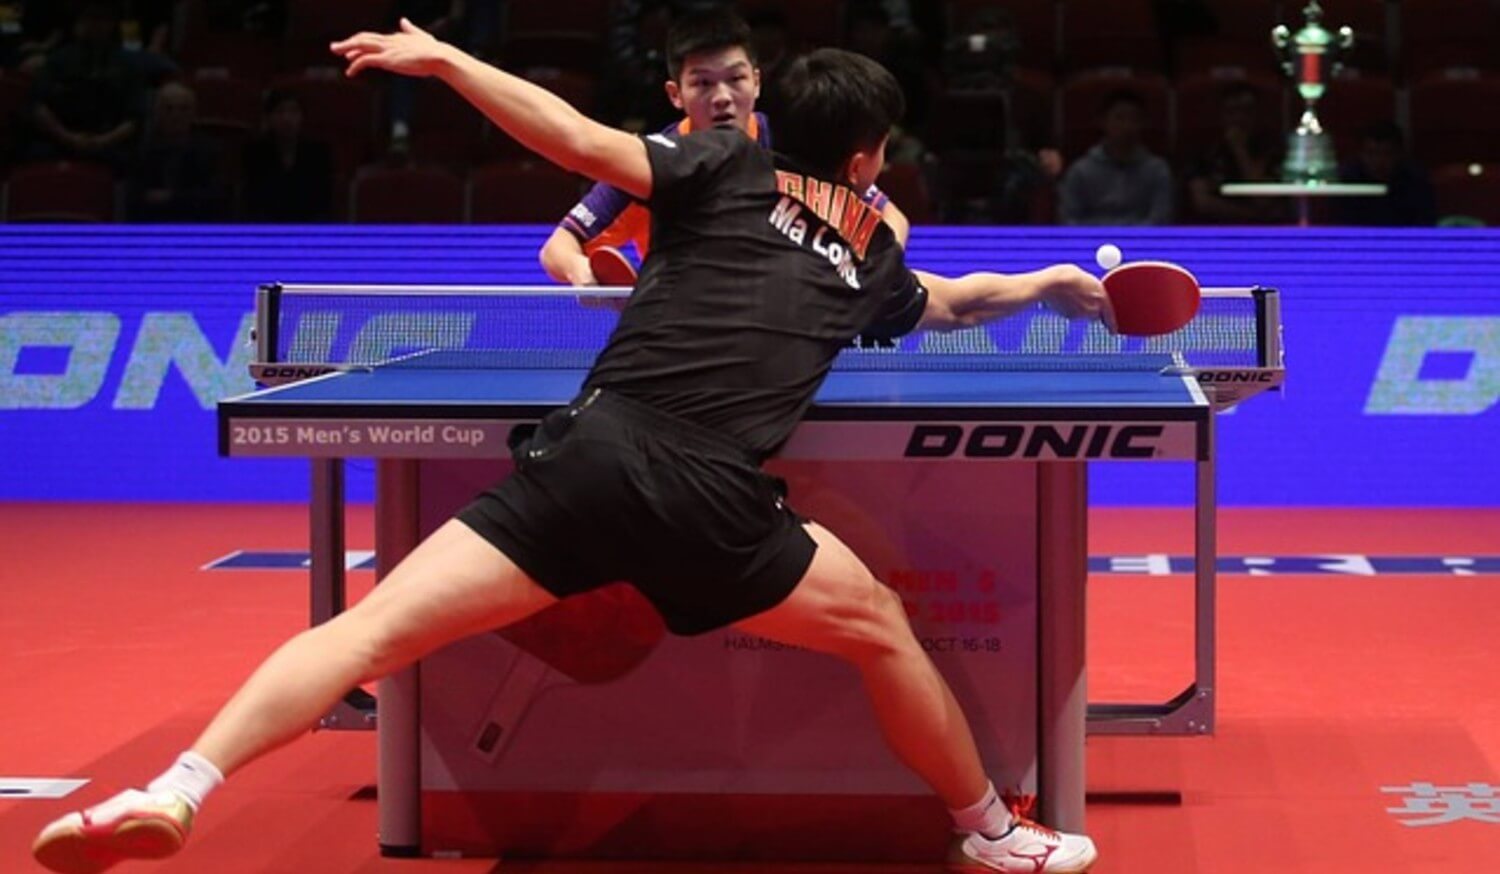 Ways for better reflexes in table tennis